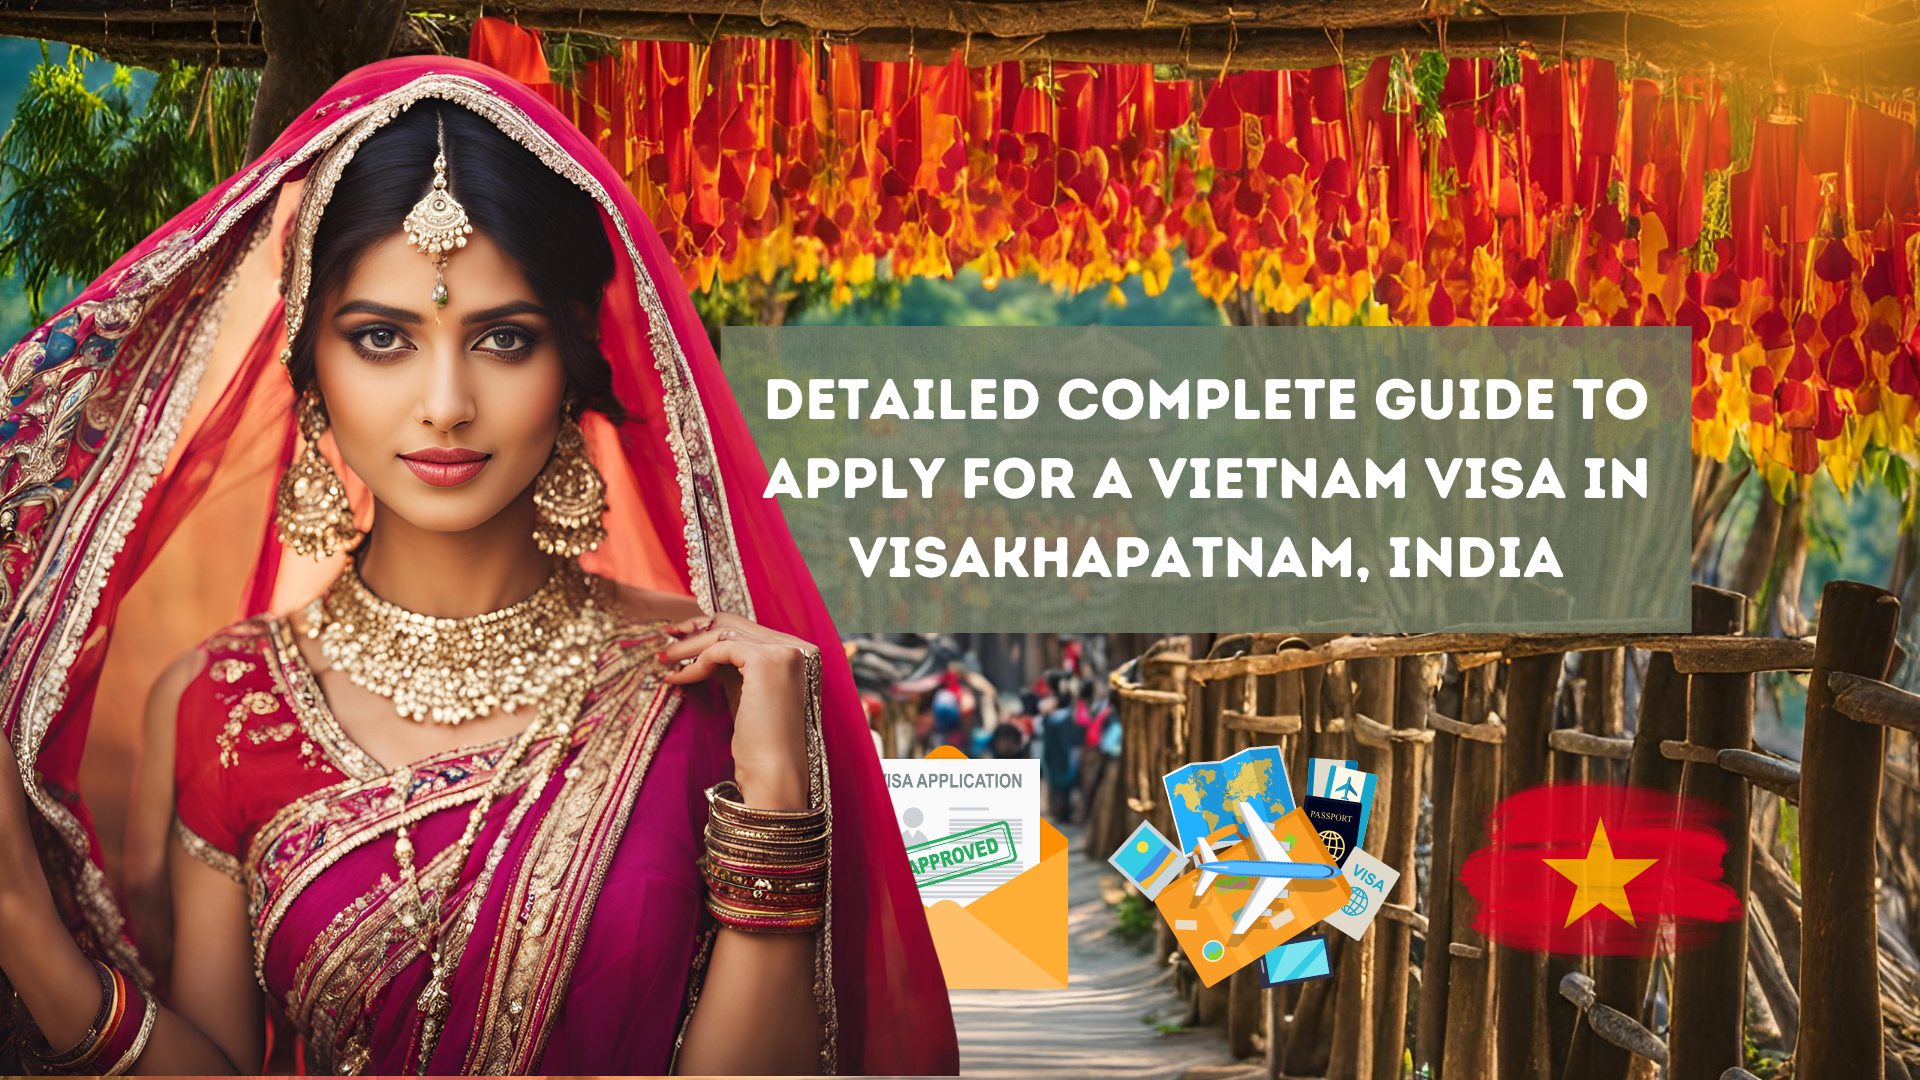 Detailed Complete Guide to Apply for a Vietnam Visa in Visakhapatnam, India